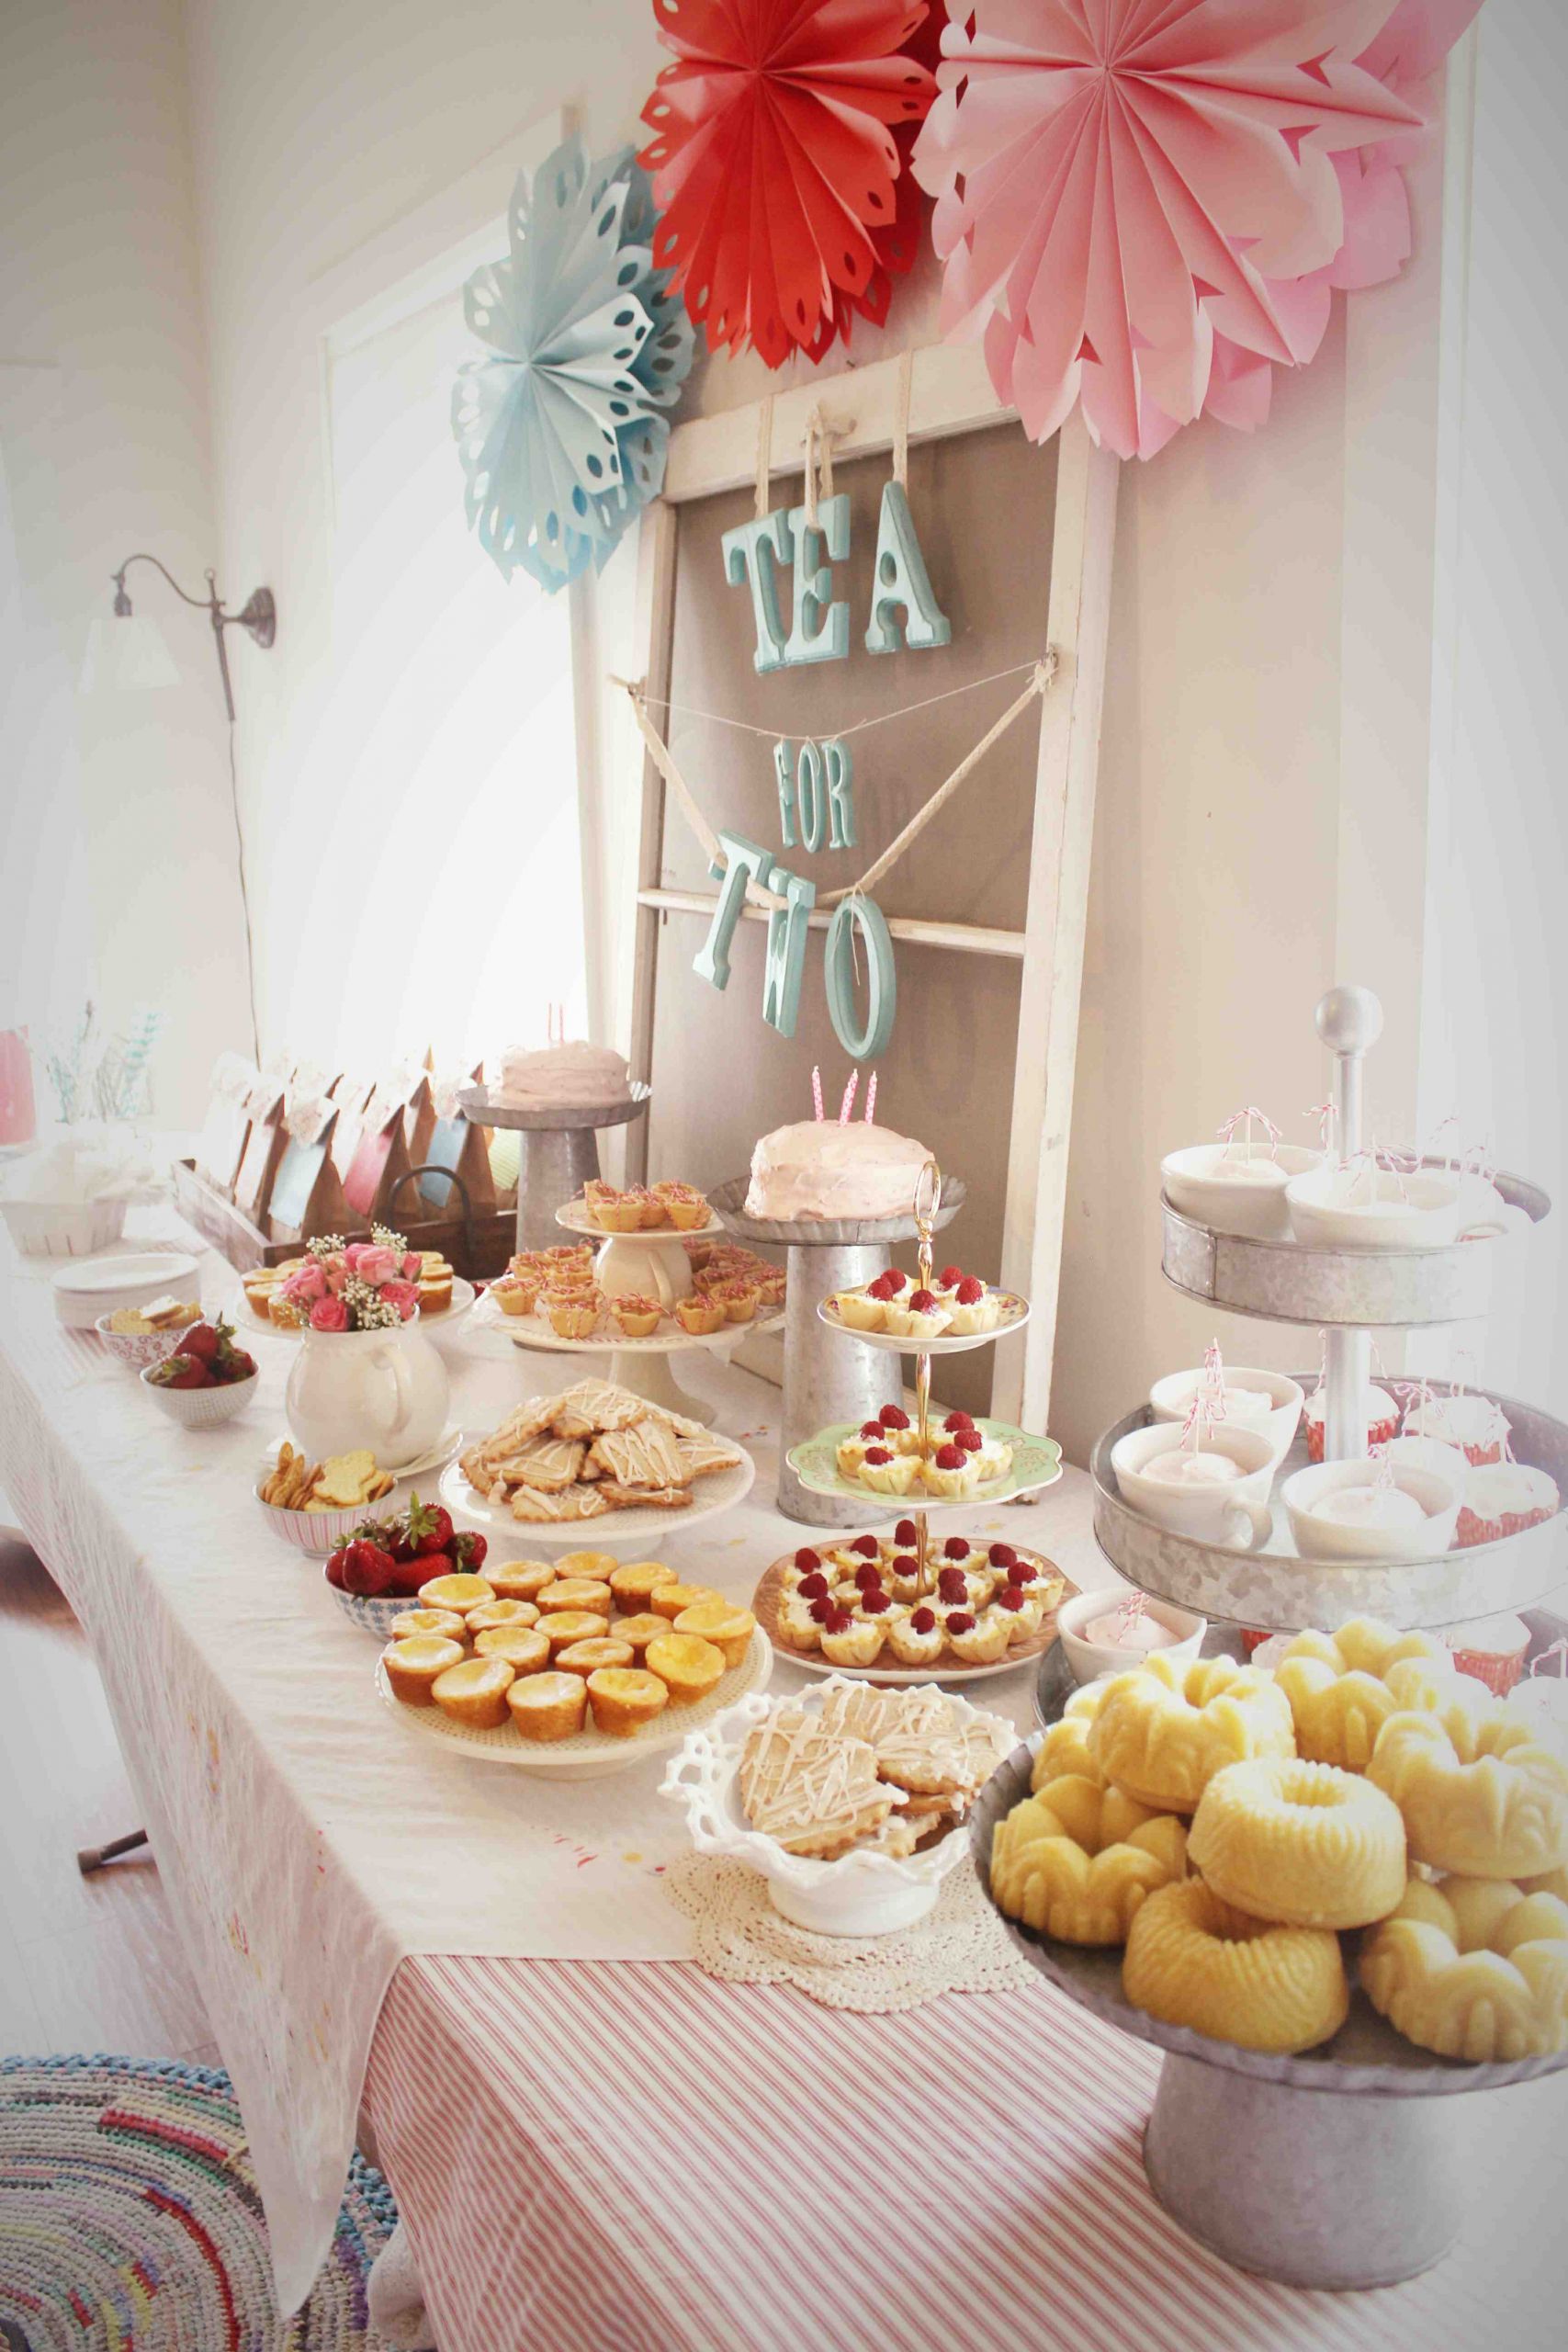 Tea Party Themed Birthday Party Ideas
 A “Tea For Two” Birthday Party